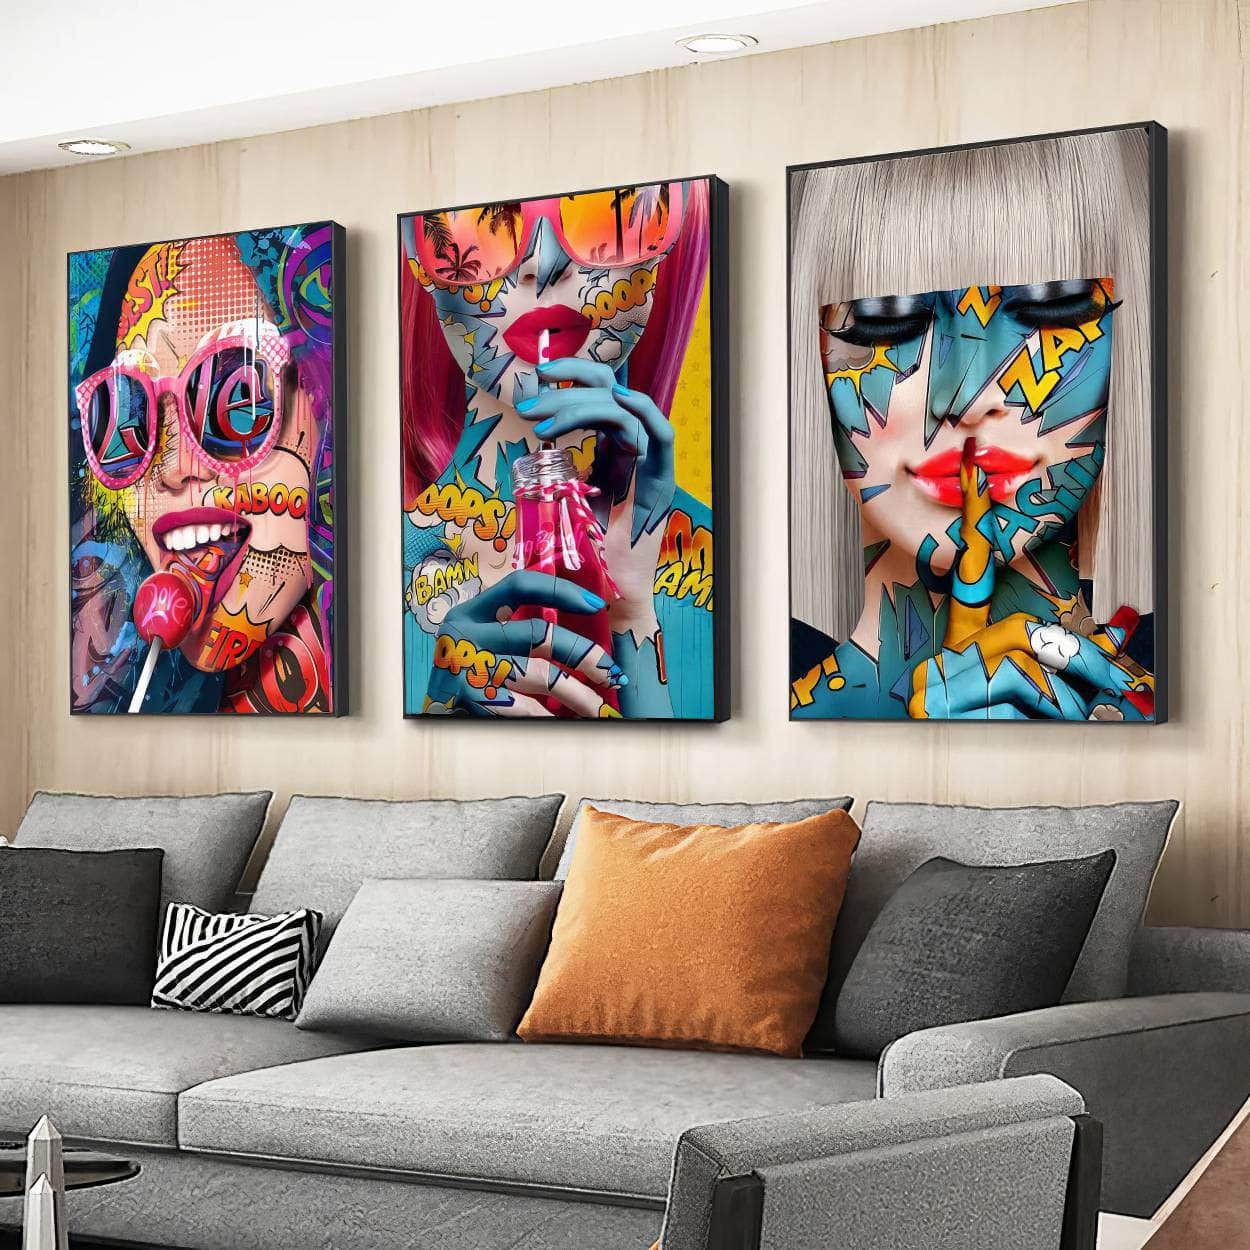 Graffiti Abstract Cool Girl Wall Art PosterGraffiti Abstract Cool Girl Wall Art Poster - Modern Pop Sexy Woman Canvas Painting for Living Room, Bedroom Home Decor, Mural Picture